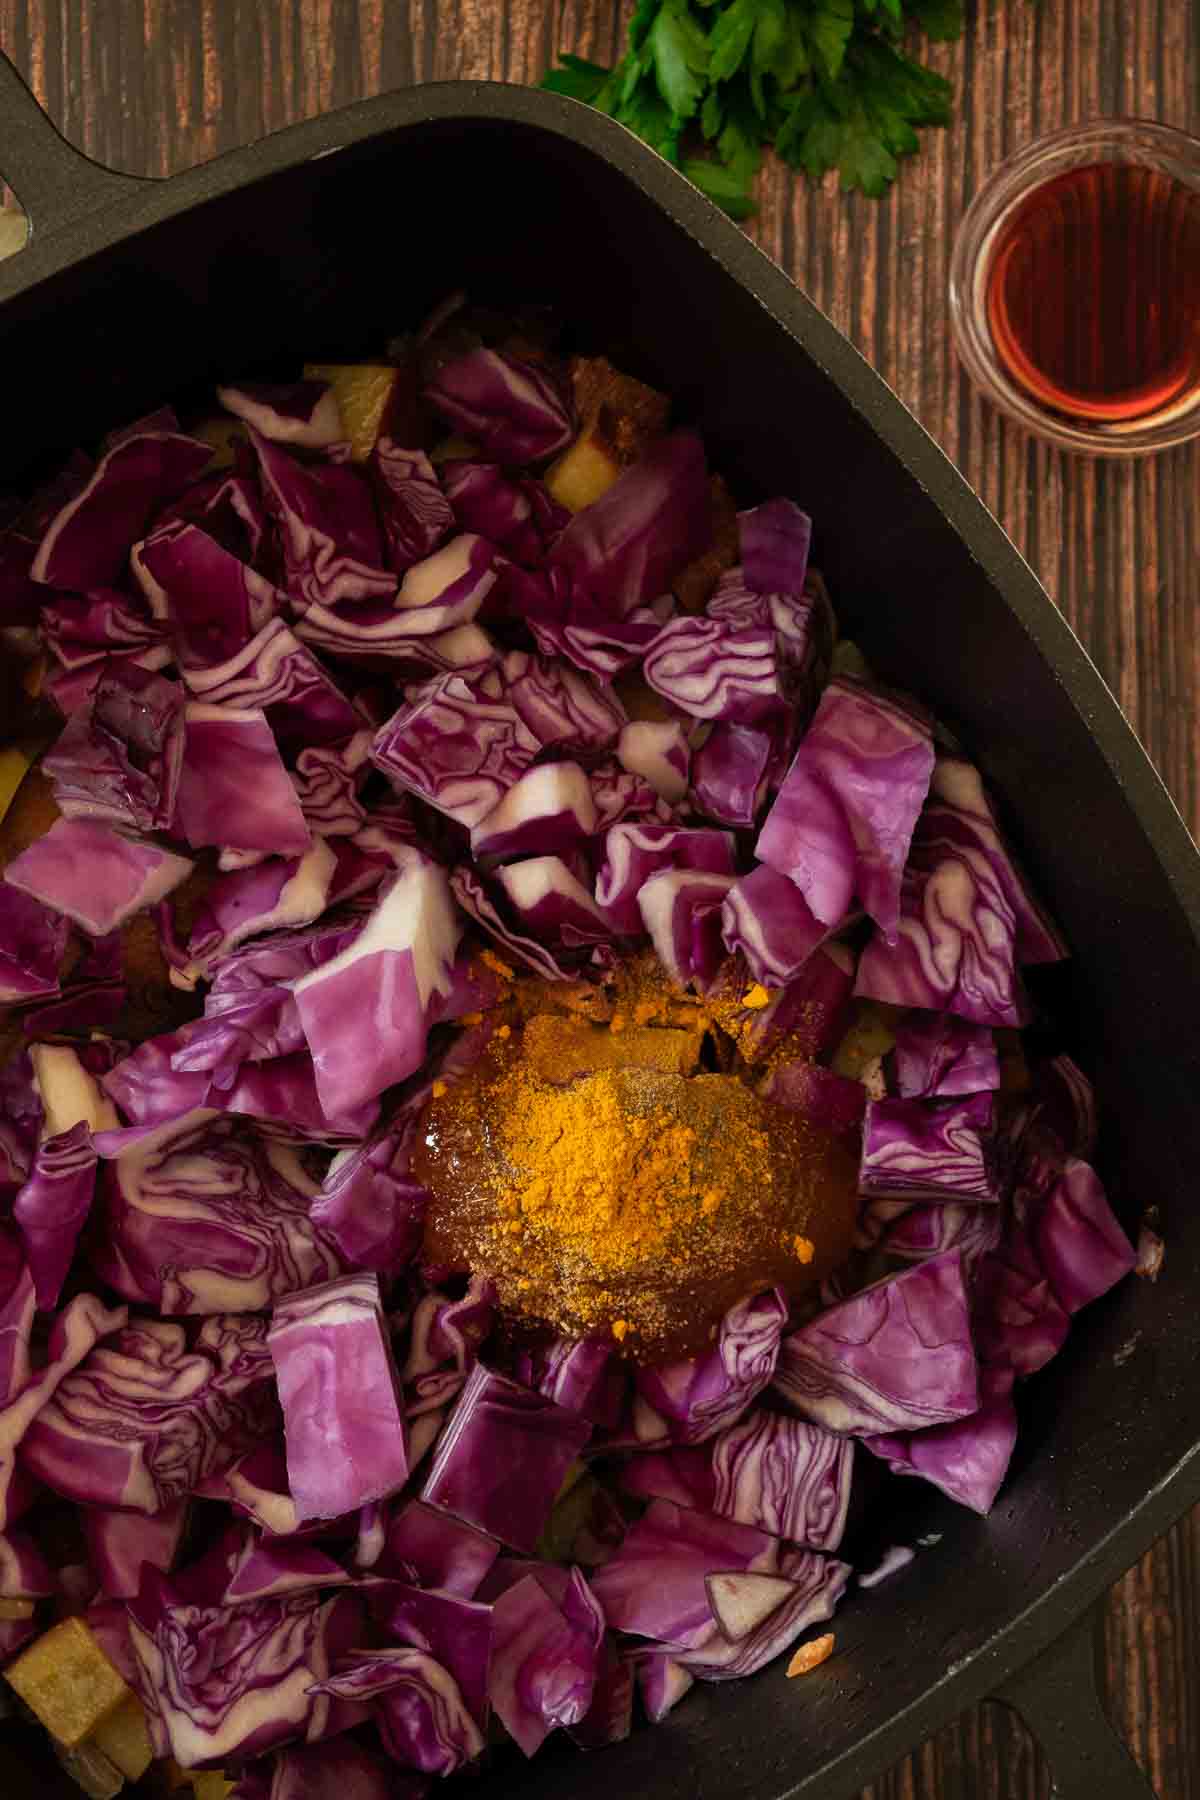 Chopped red cabbage added to the pot with spices.